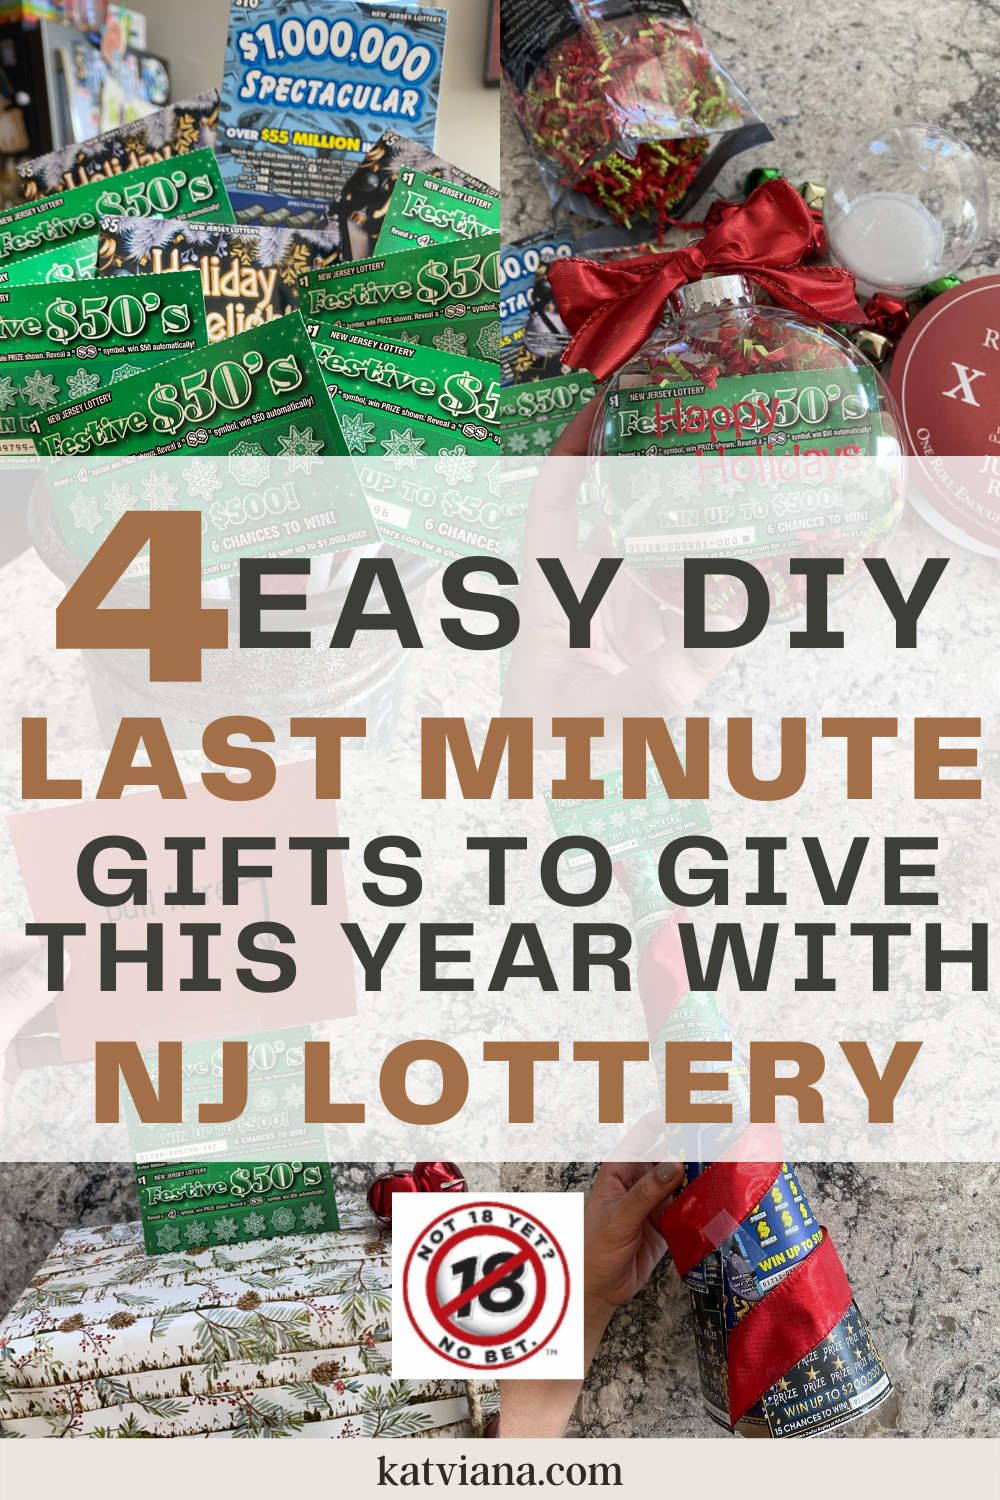 4 Easy Last Minute DIY Gifts to Give With NJ Lottery